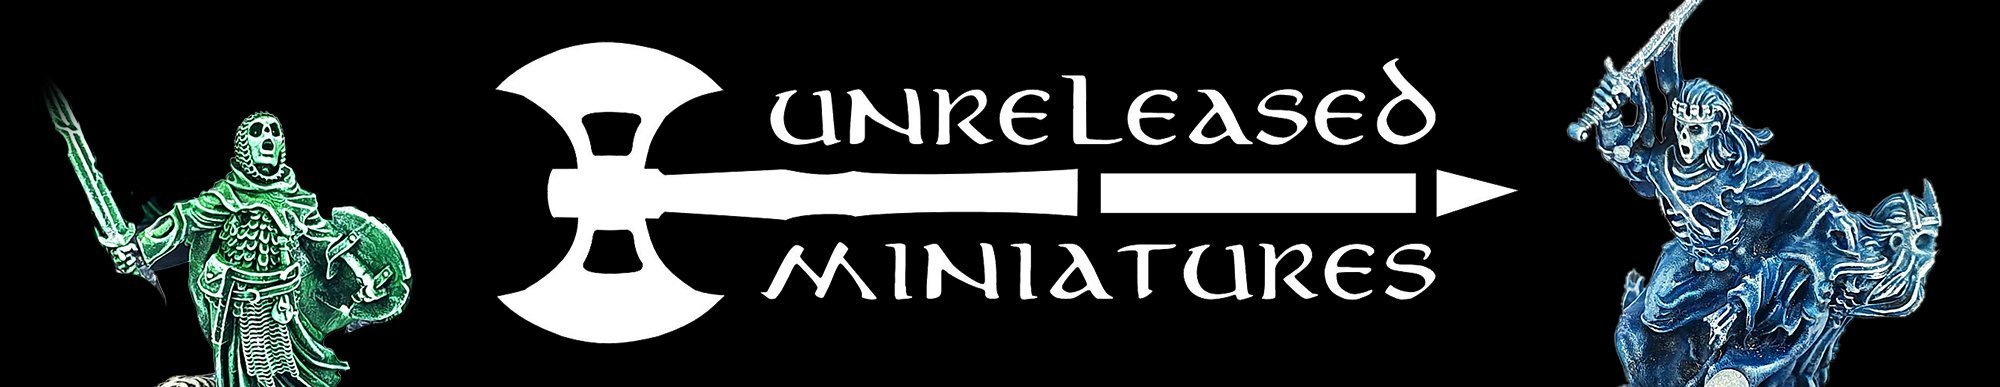 Unreleased Miniatures Logo Banner with Miniatures